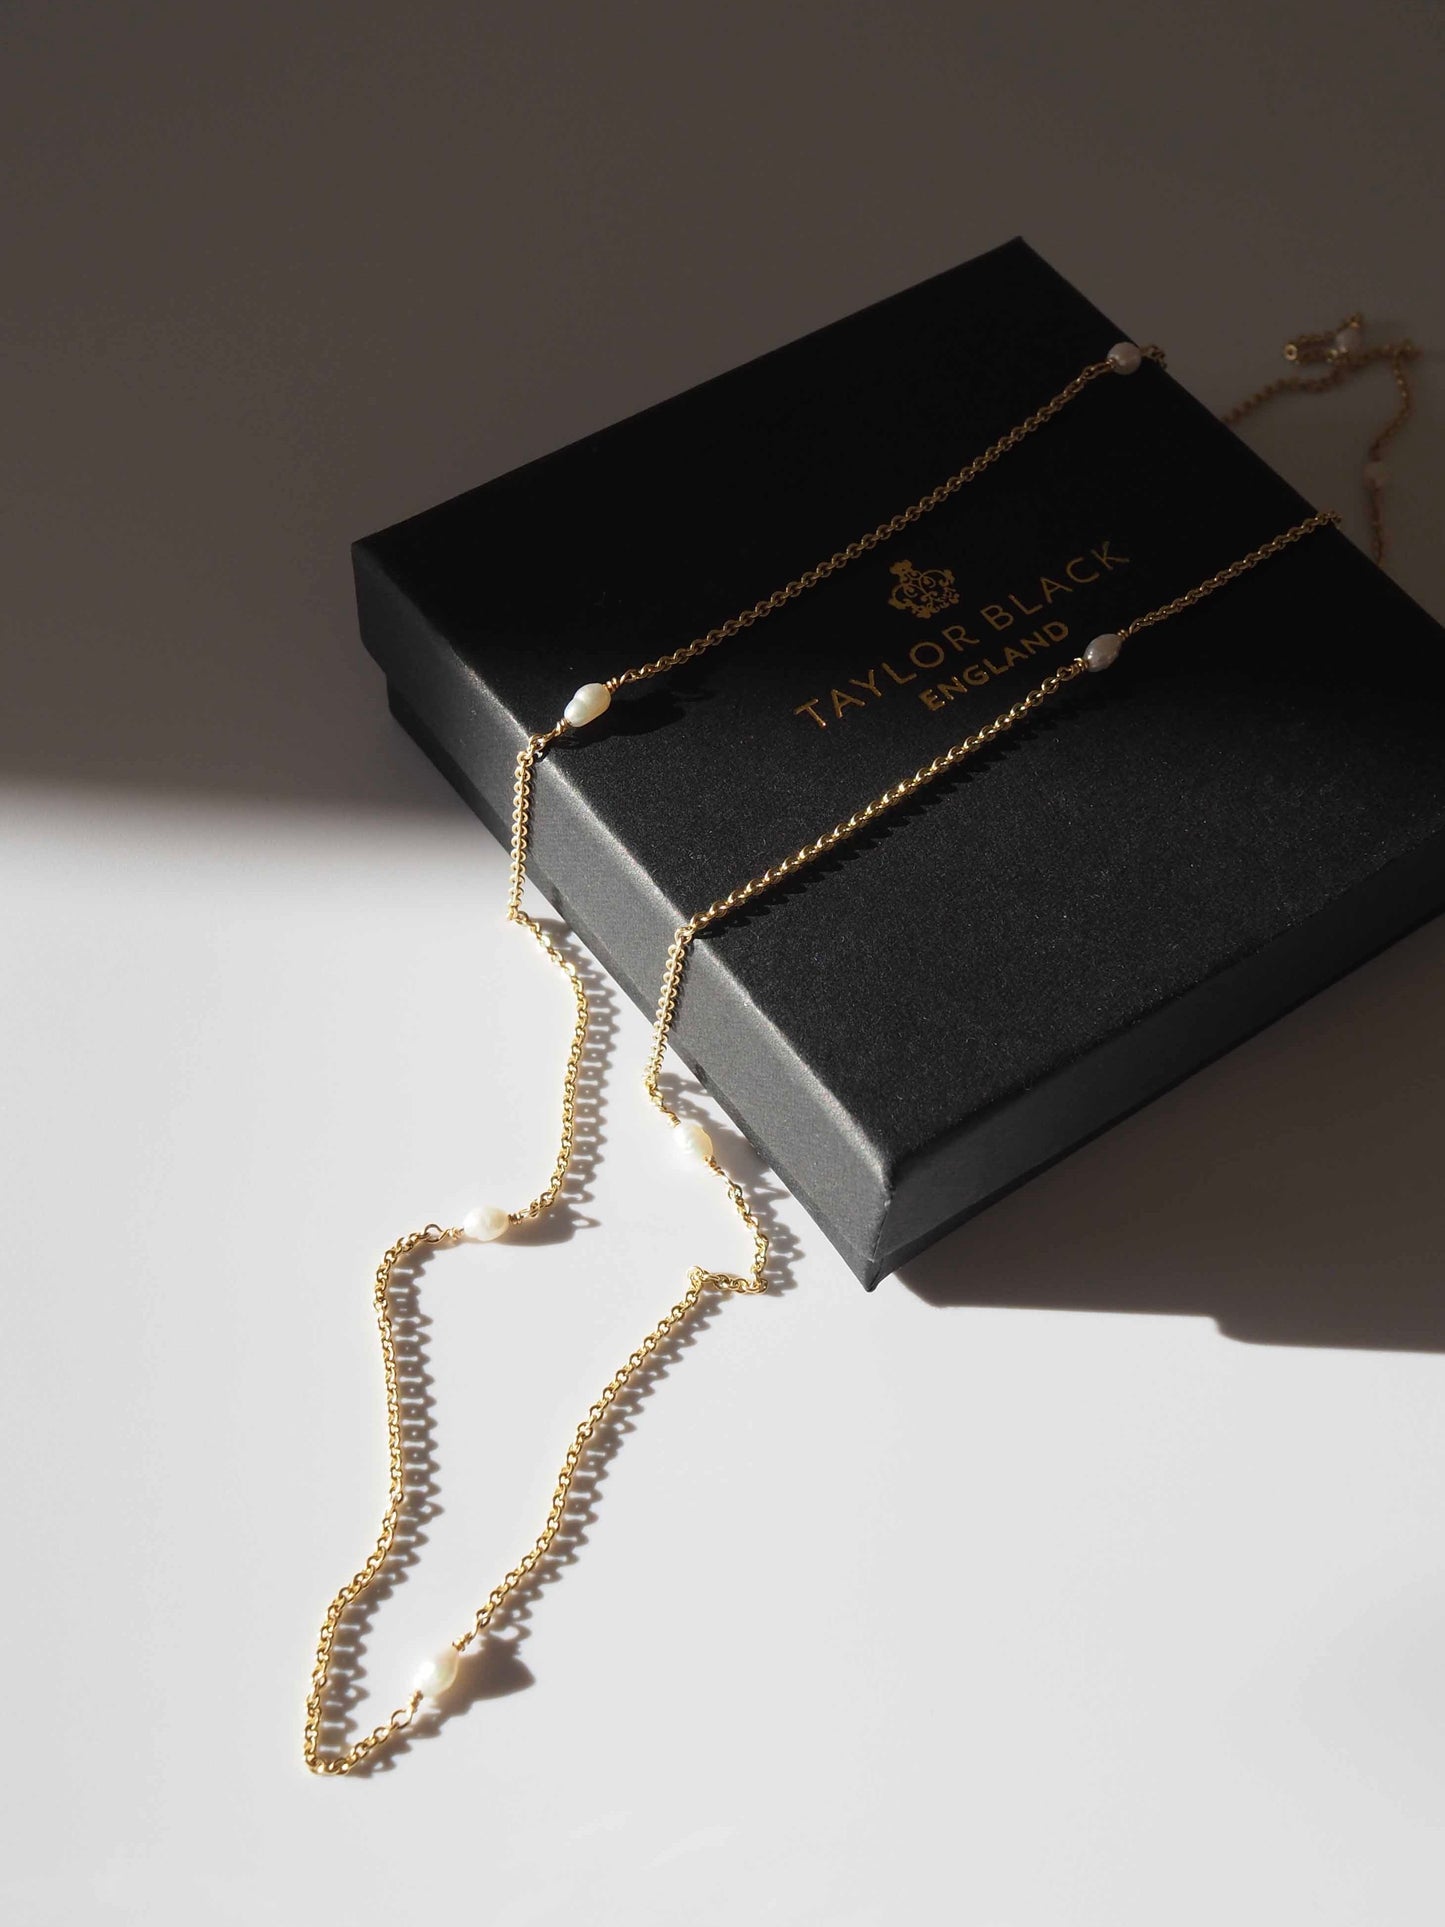 rice pearl and gold necklace on box